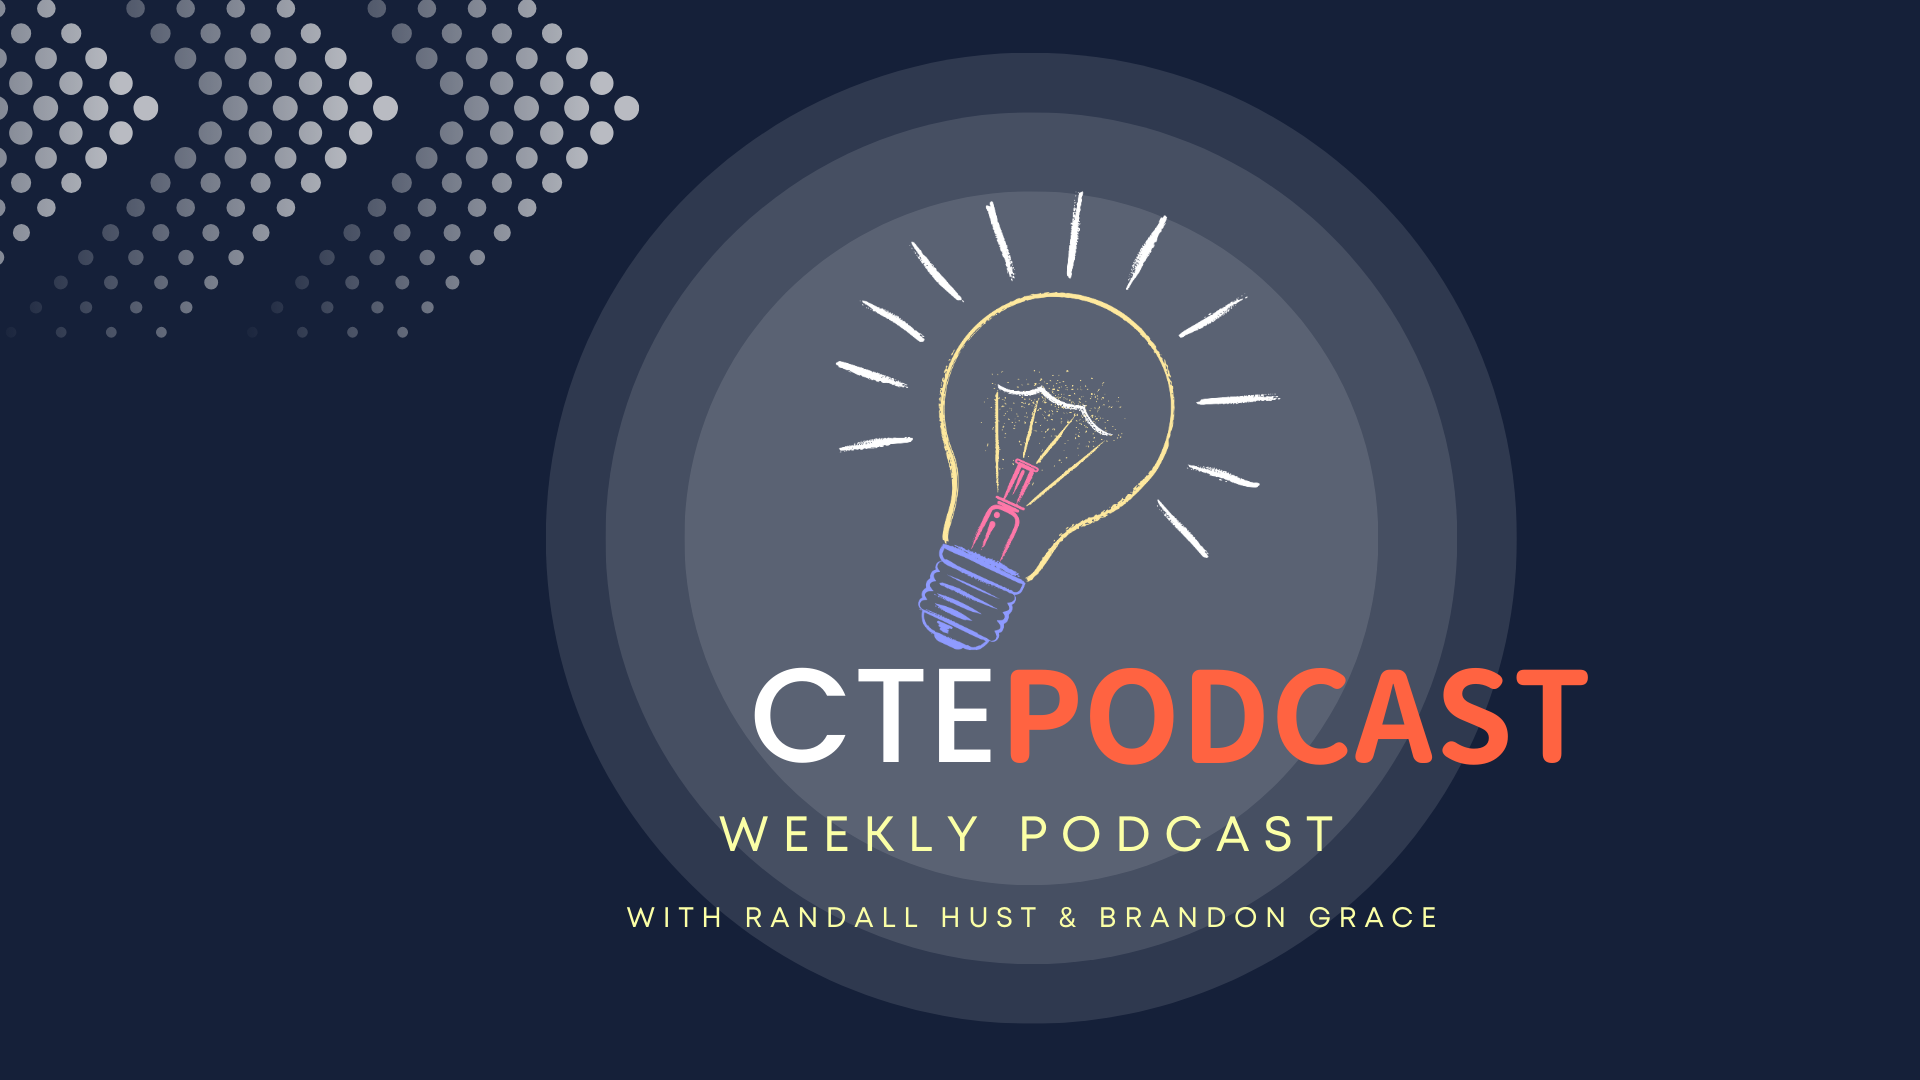 Lightbulb CTE Podcast Weekly Podcast with Randall Hust and Brandon Grace